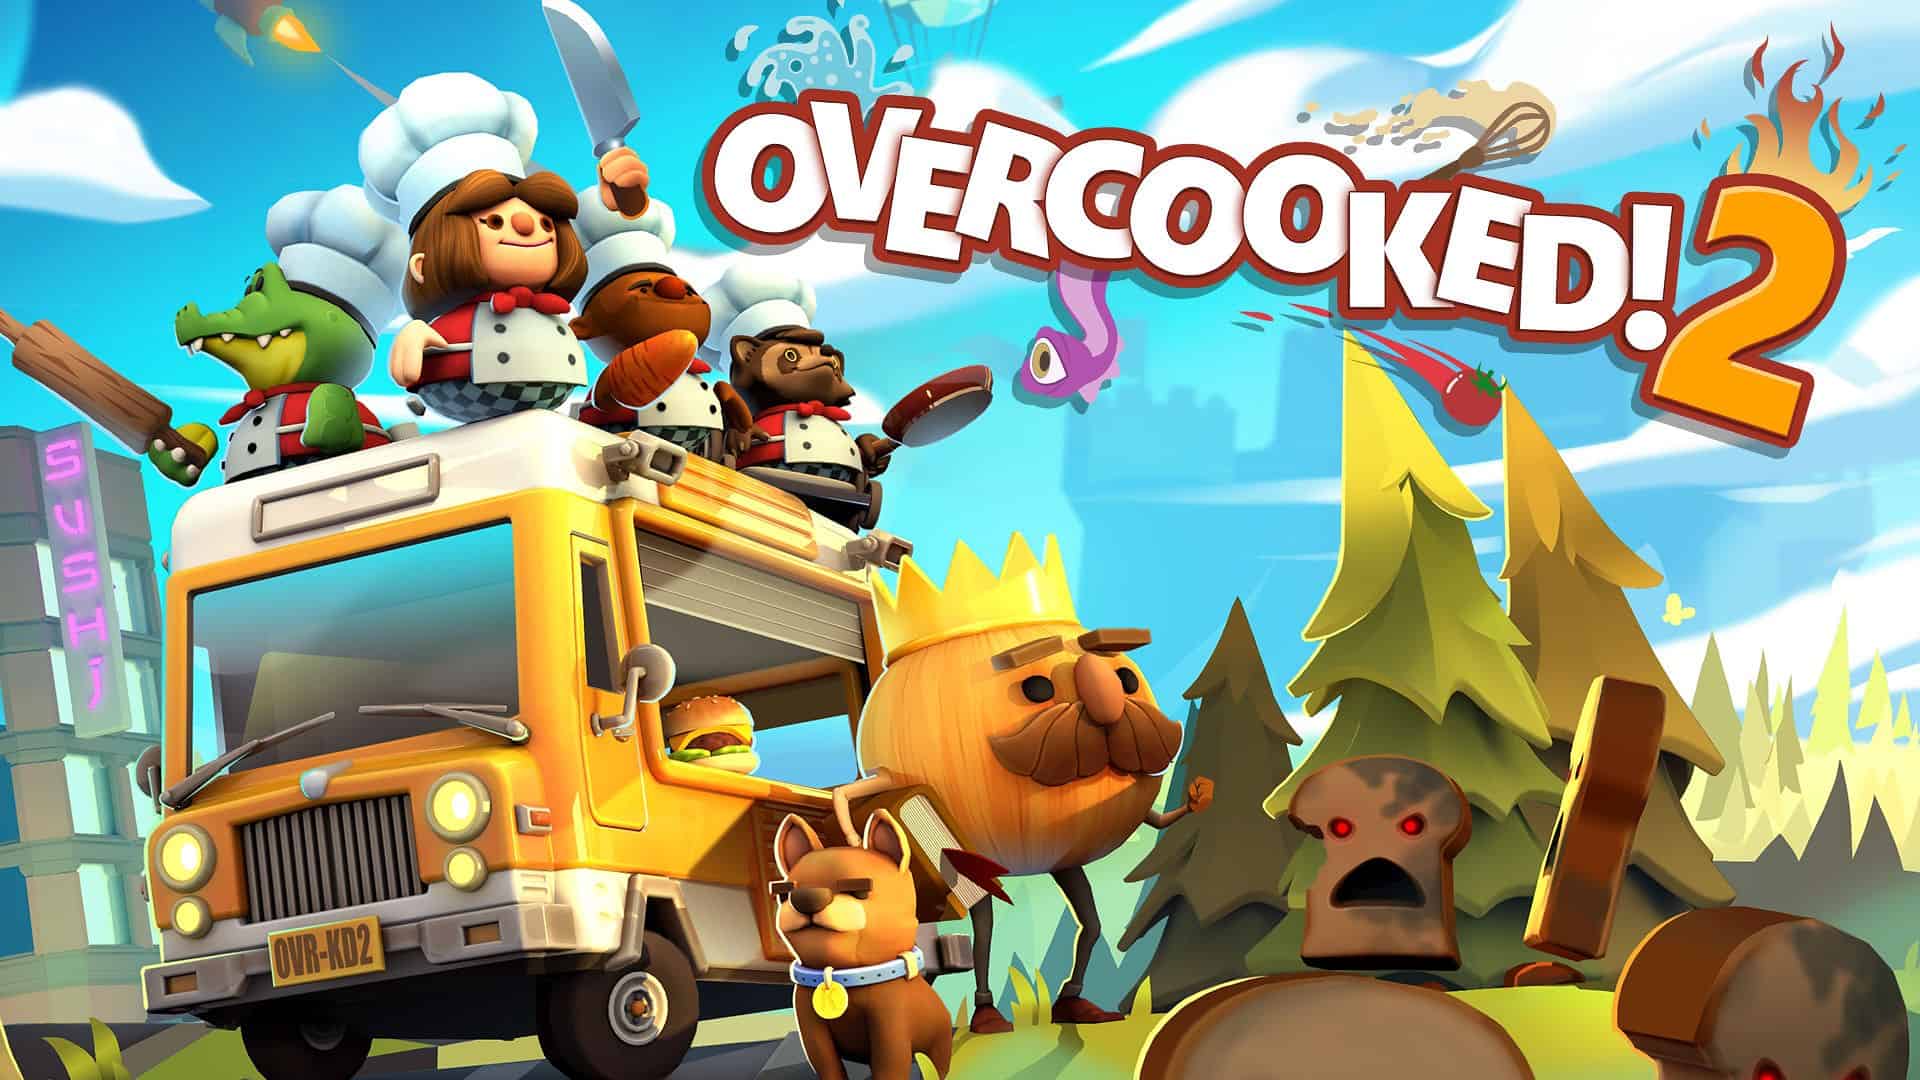 Overcooked! 2 - Microsoft Xbox One for sale online